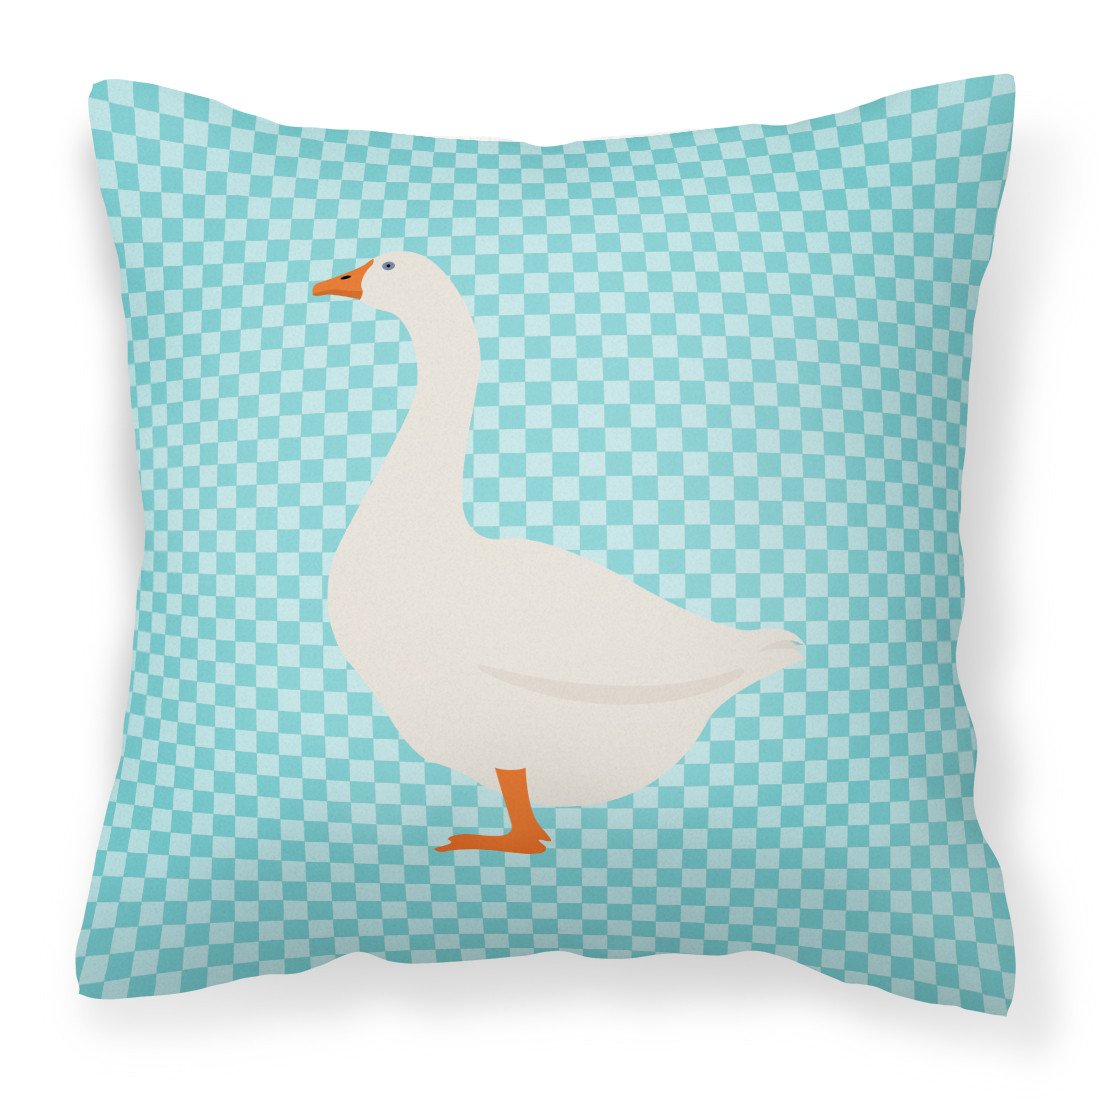 Embden Goose Blue Check Fabric Decorative Pillow BB8066PW1818 by Caroline's Treasures